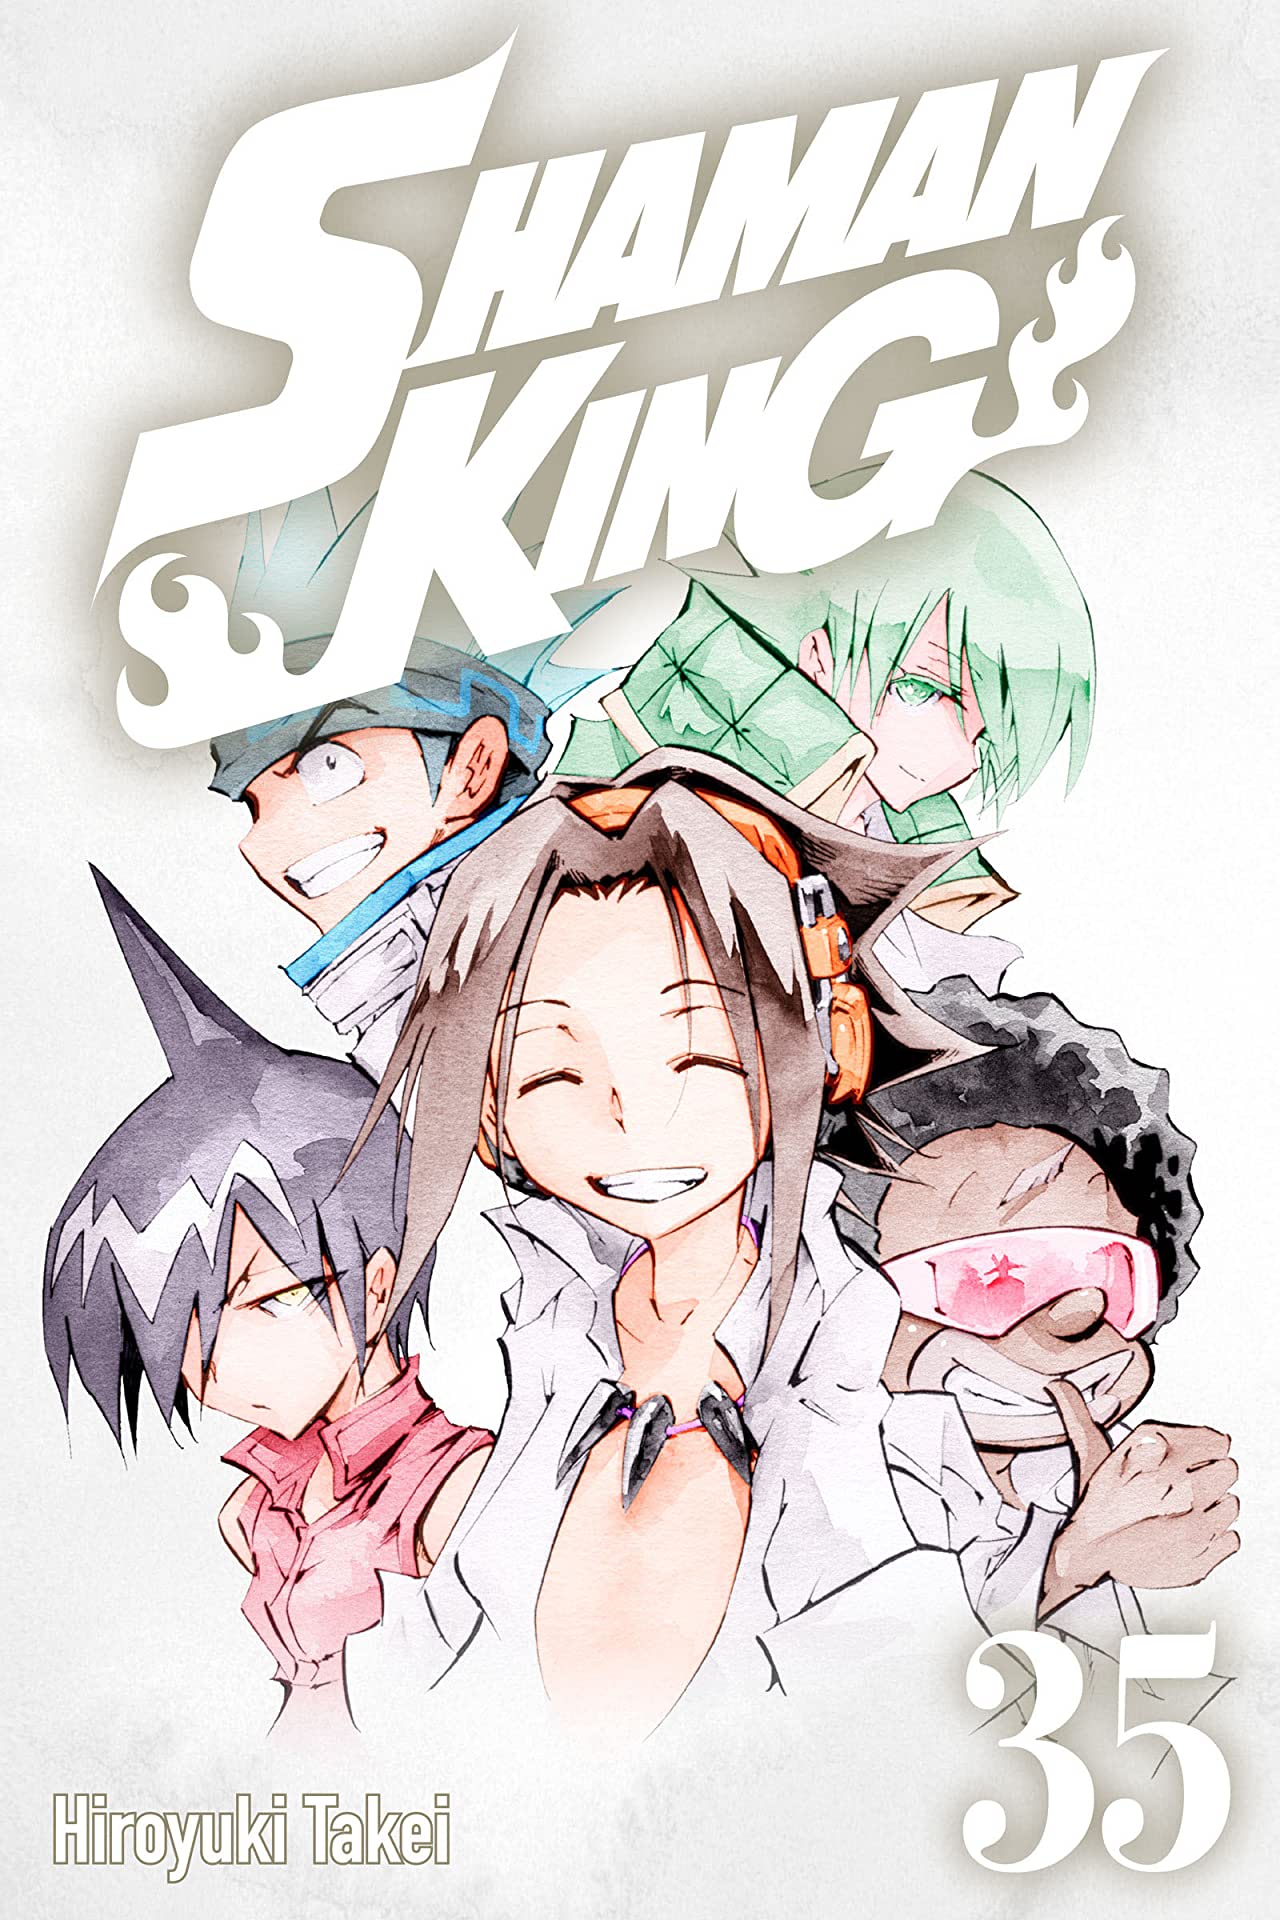 The Final Three Volumes Of Shaman King Coming To U S After A 16 Year Wait Gamesradar